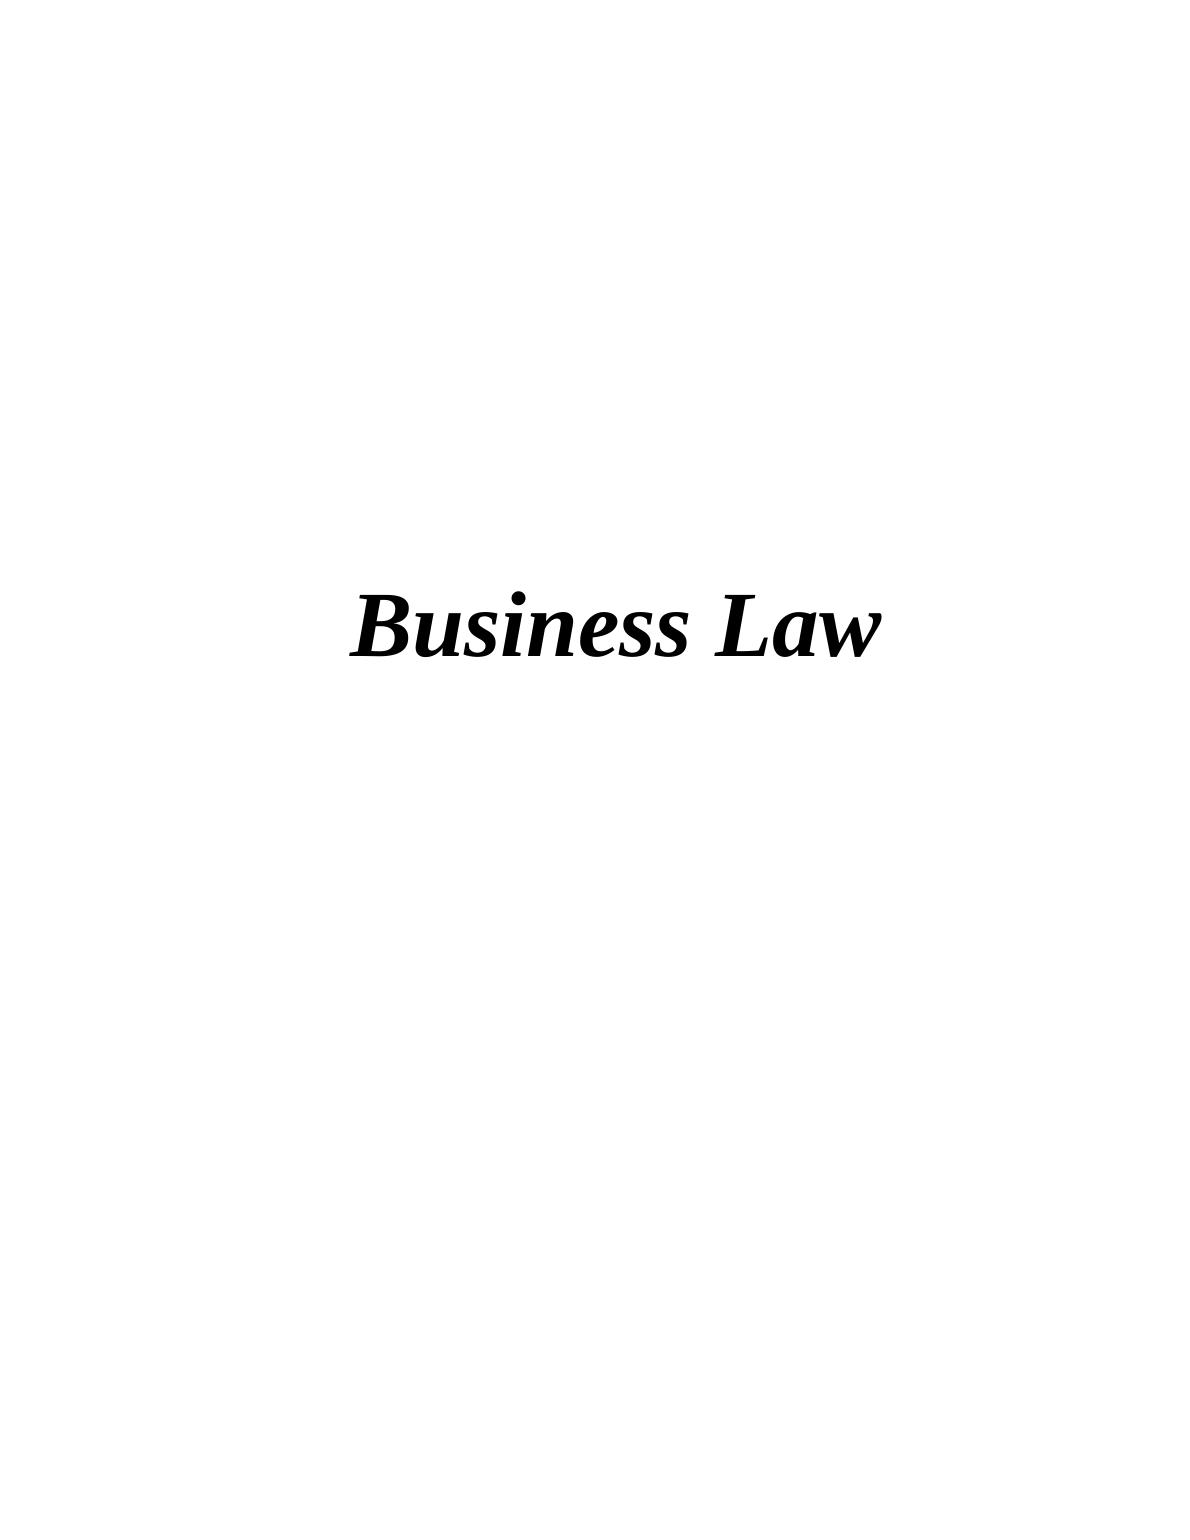 Business Law: Nature of Legal System & Impact on Business_1